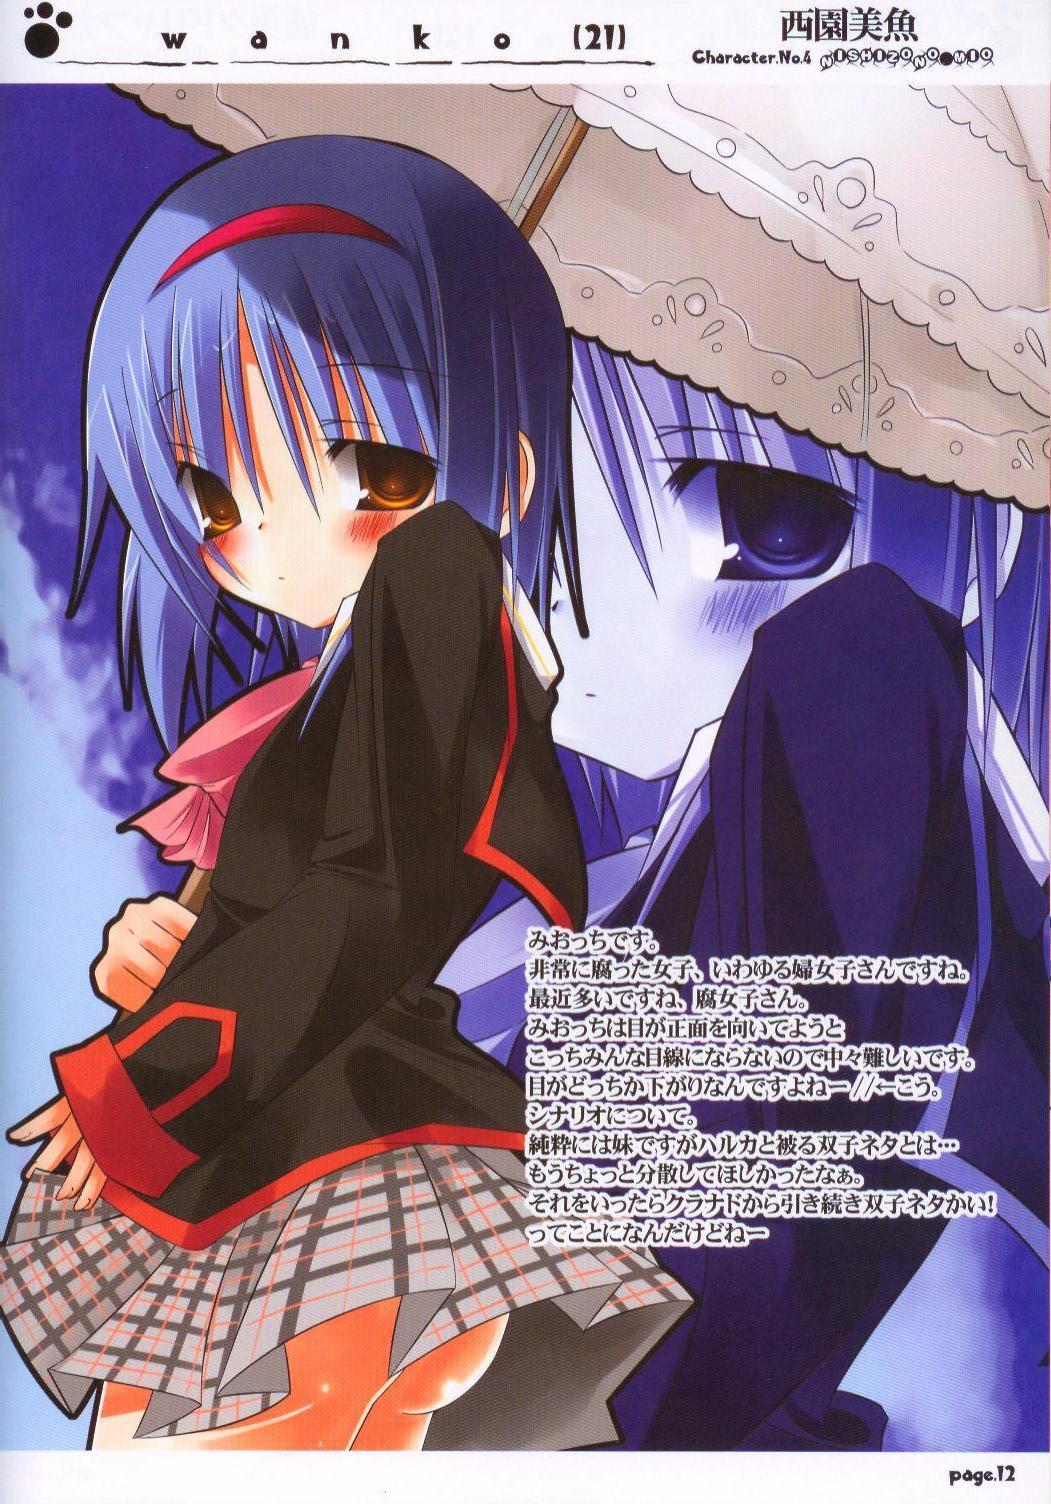 Cocksuckers wanko - Little busters Innocent - Page 9